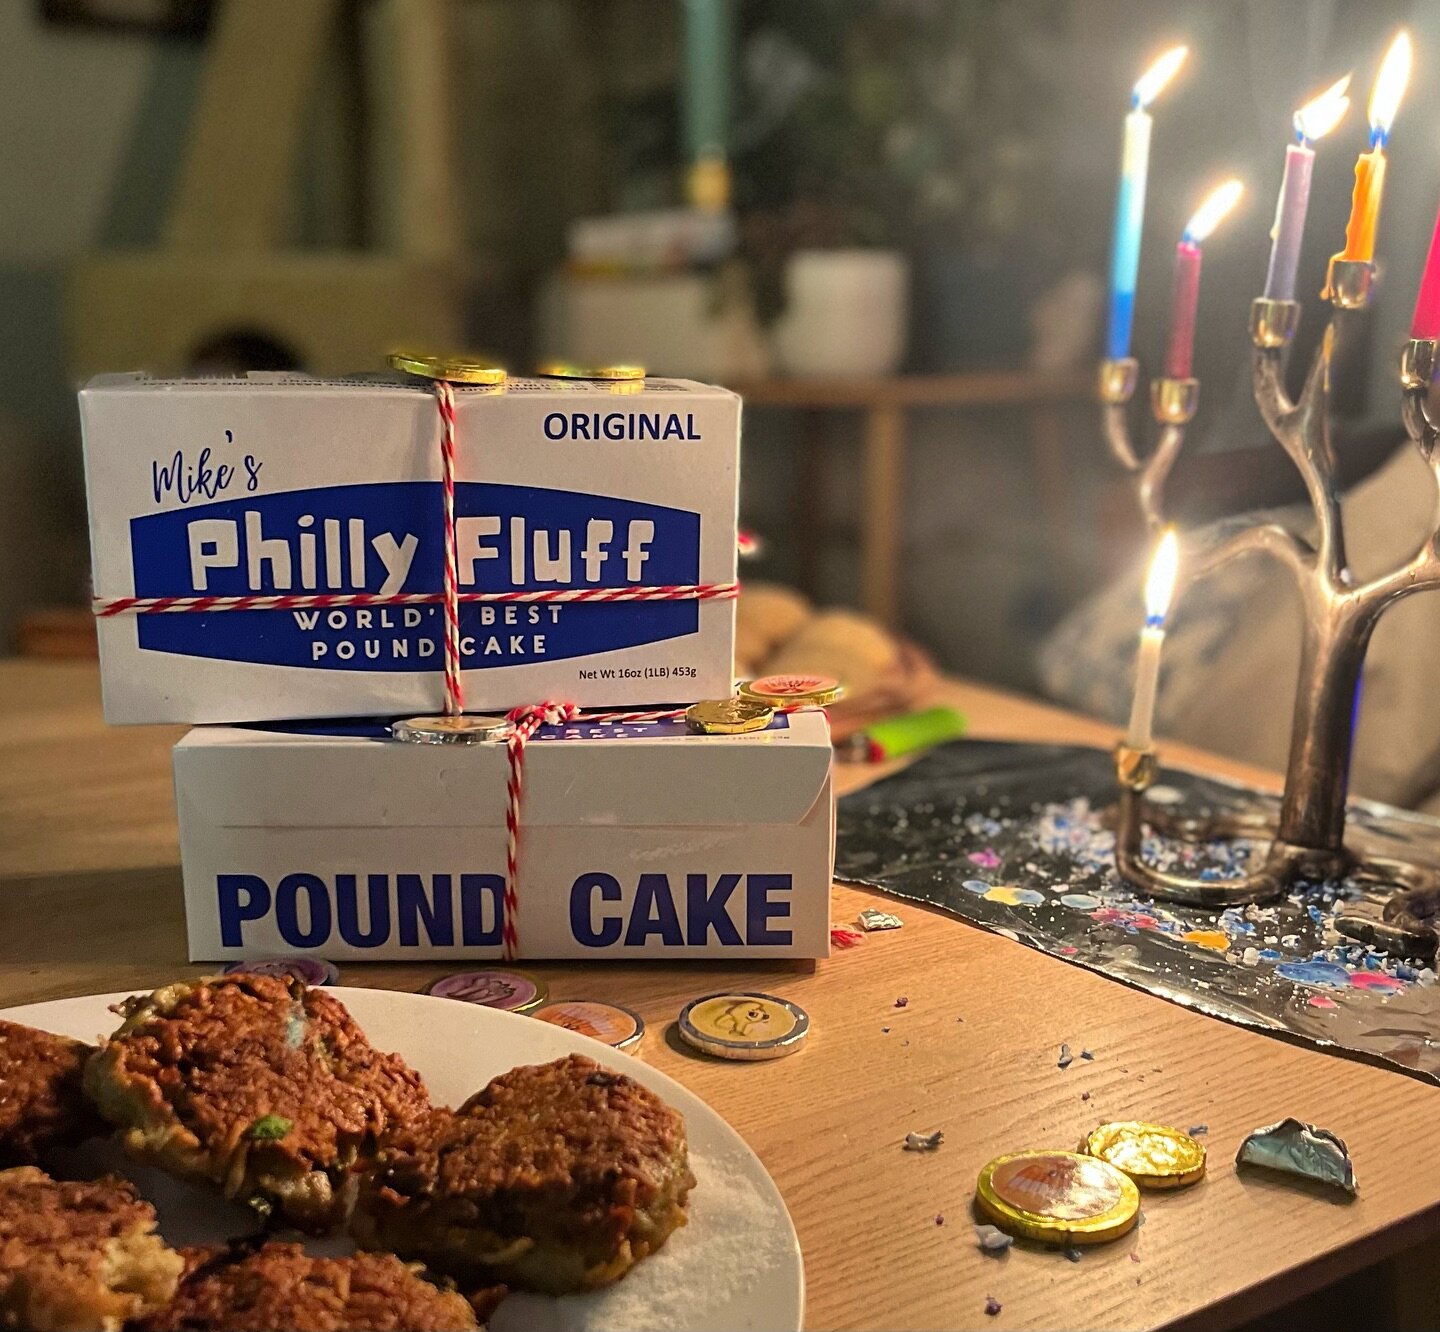 Happy Hanukkah y&rsquo;all! Philly Fluff makes the perfect gift. Order today and we&rsquo;ll have it to you by night 8! 🕎🔥🤩 
.
.
.
#happyhanukkah #hanukkahgifts #gift #cake #poundcake #cakegift #shippingincluded #delicious😋 #latkes #hannukahparty